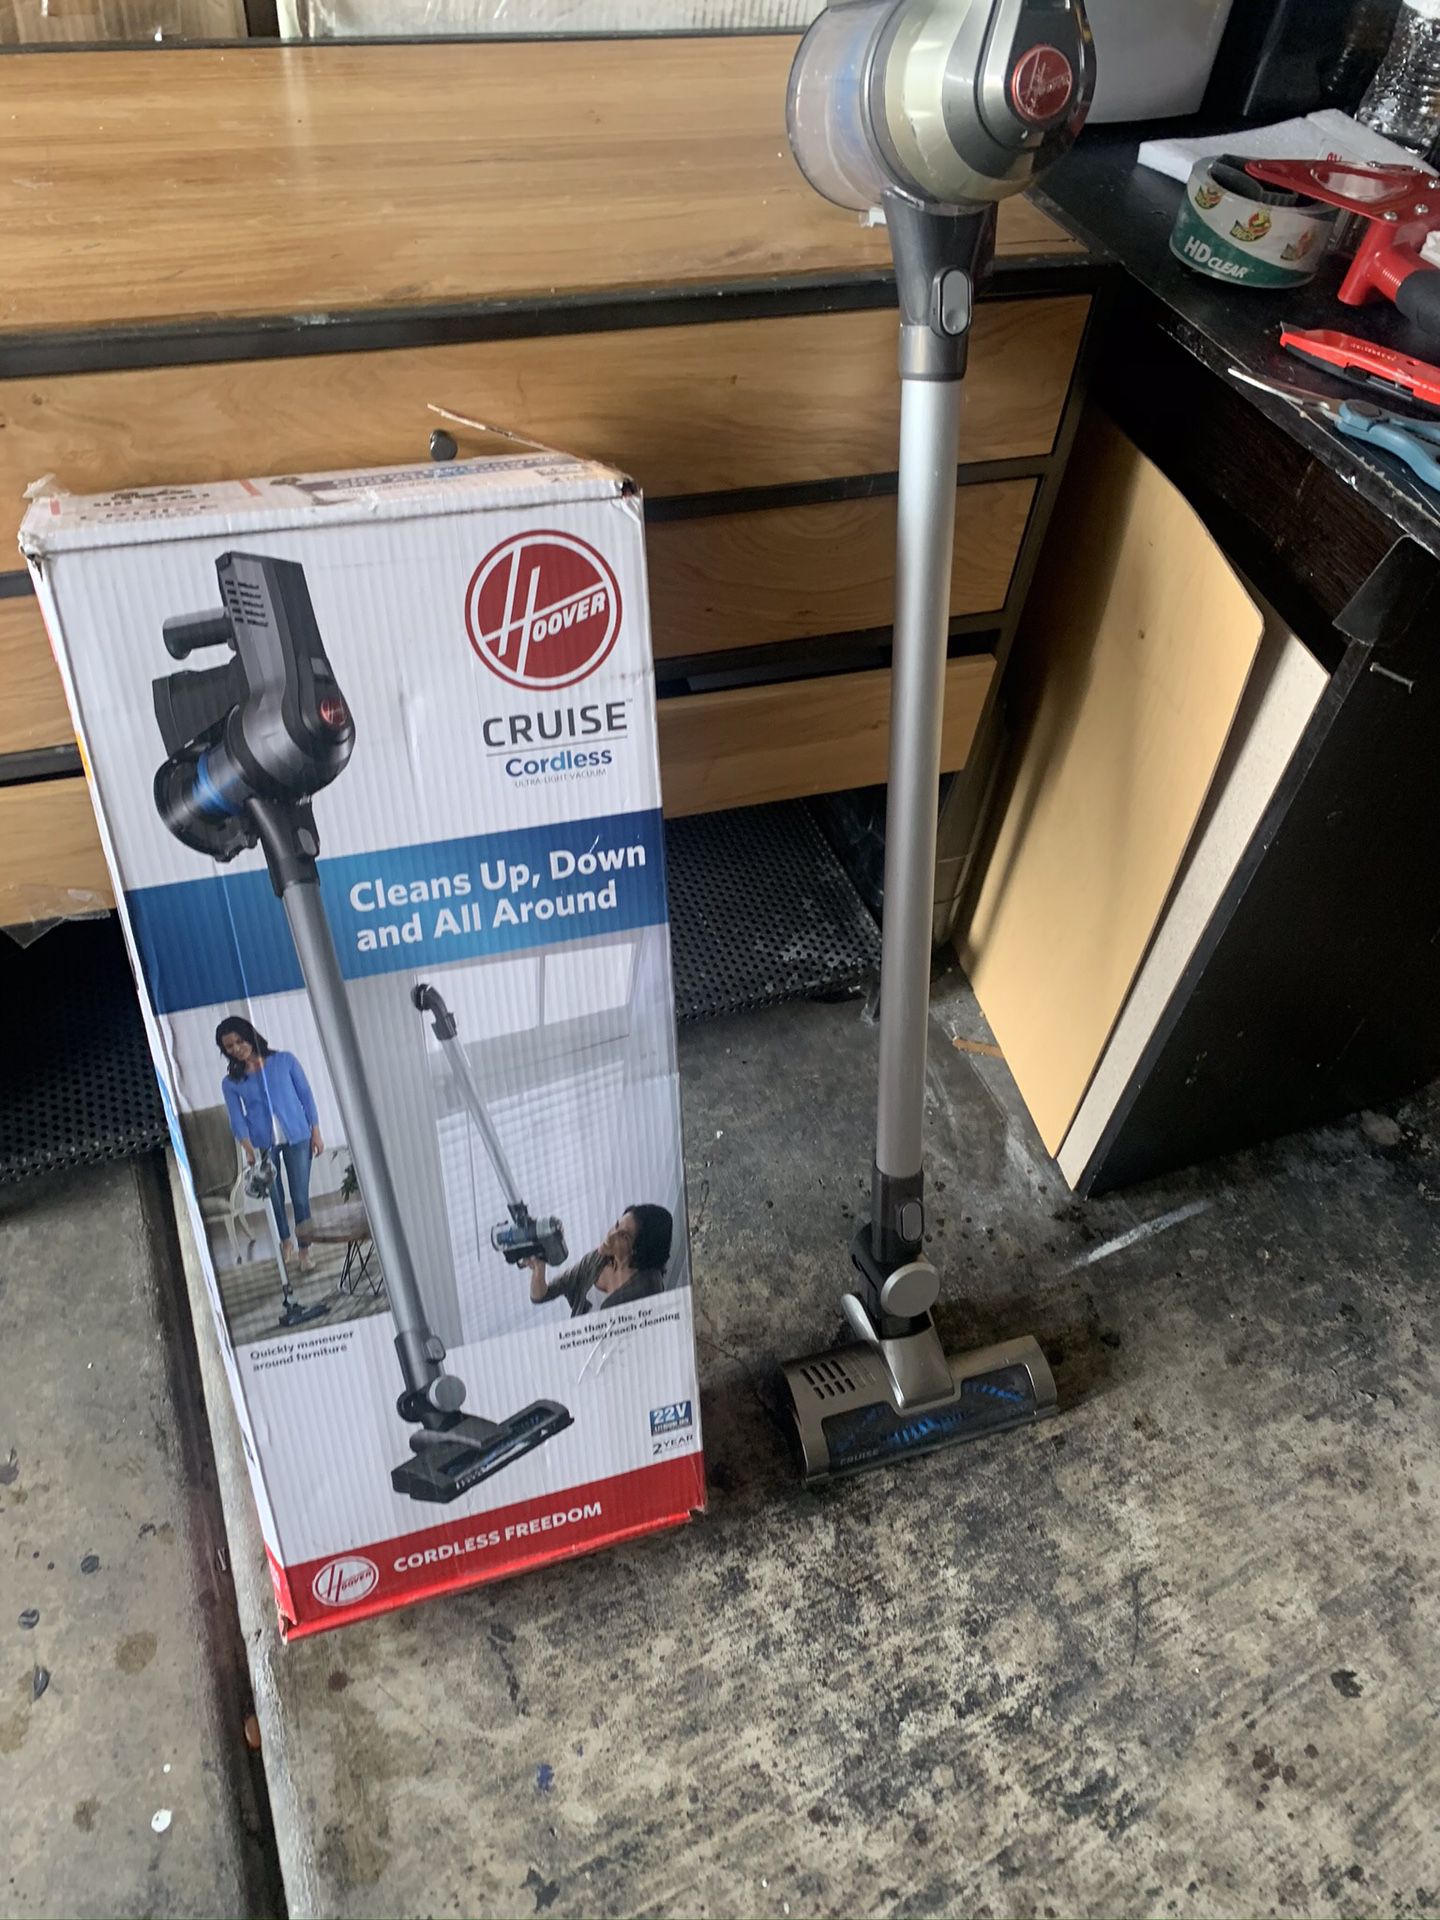 Hoover cordless stick vacuum used excellent condition all accessories included in original packaging